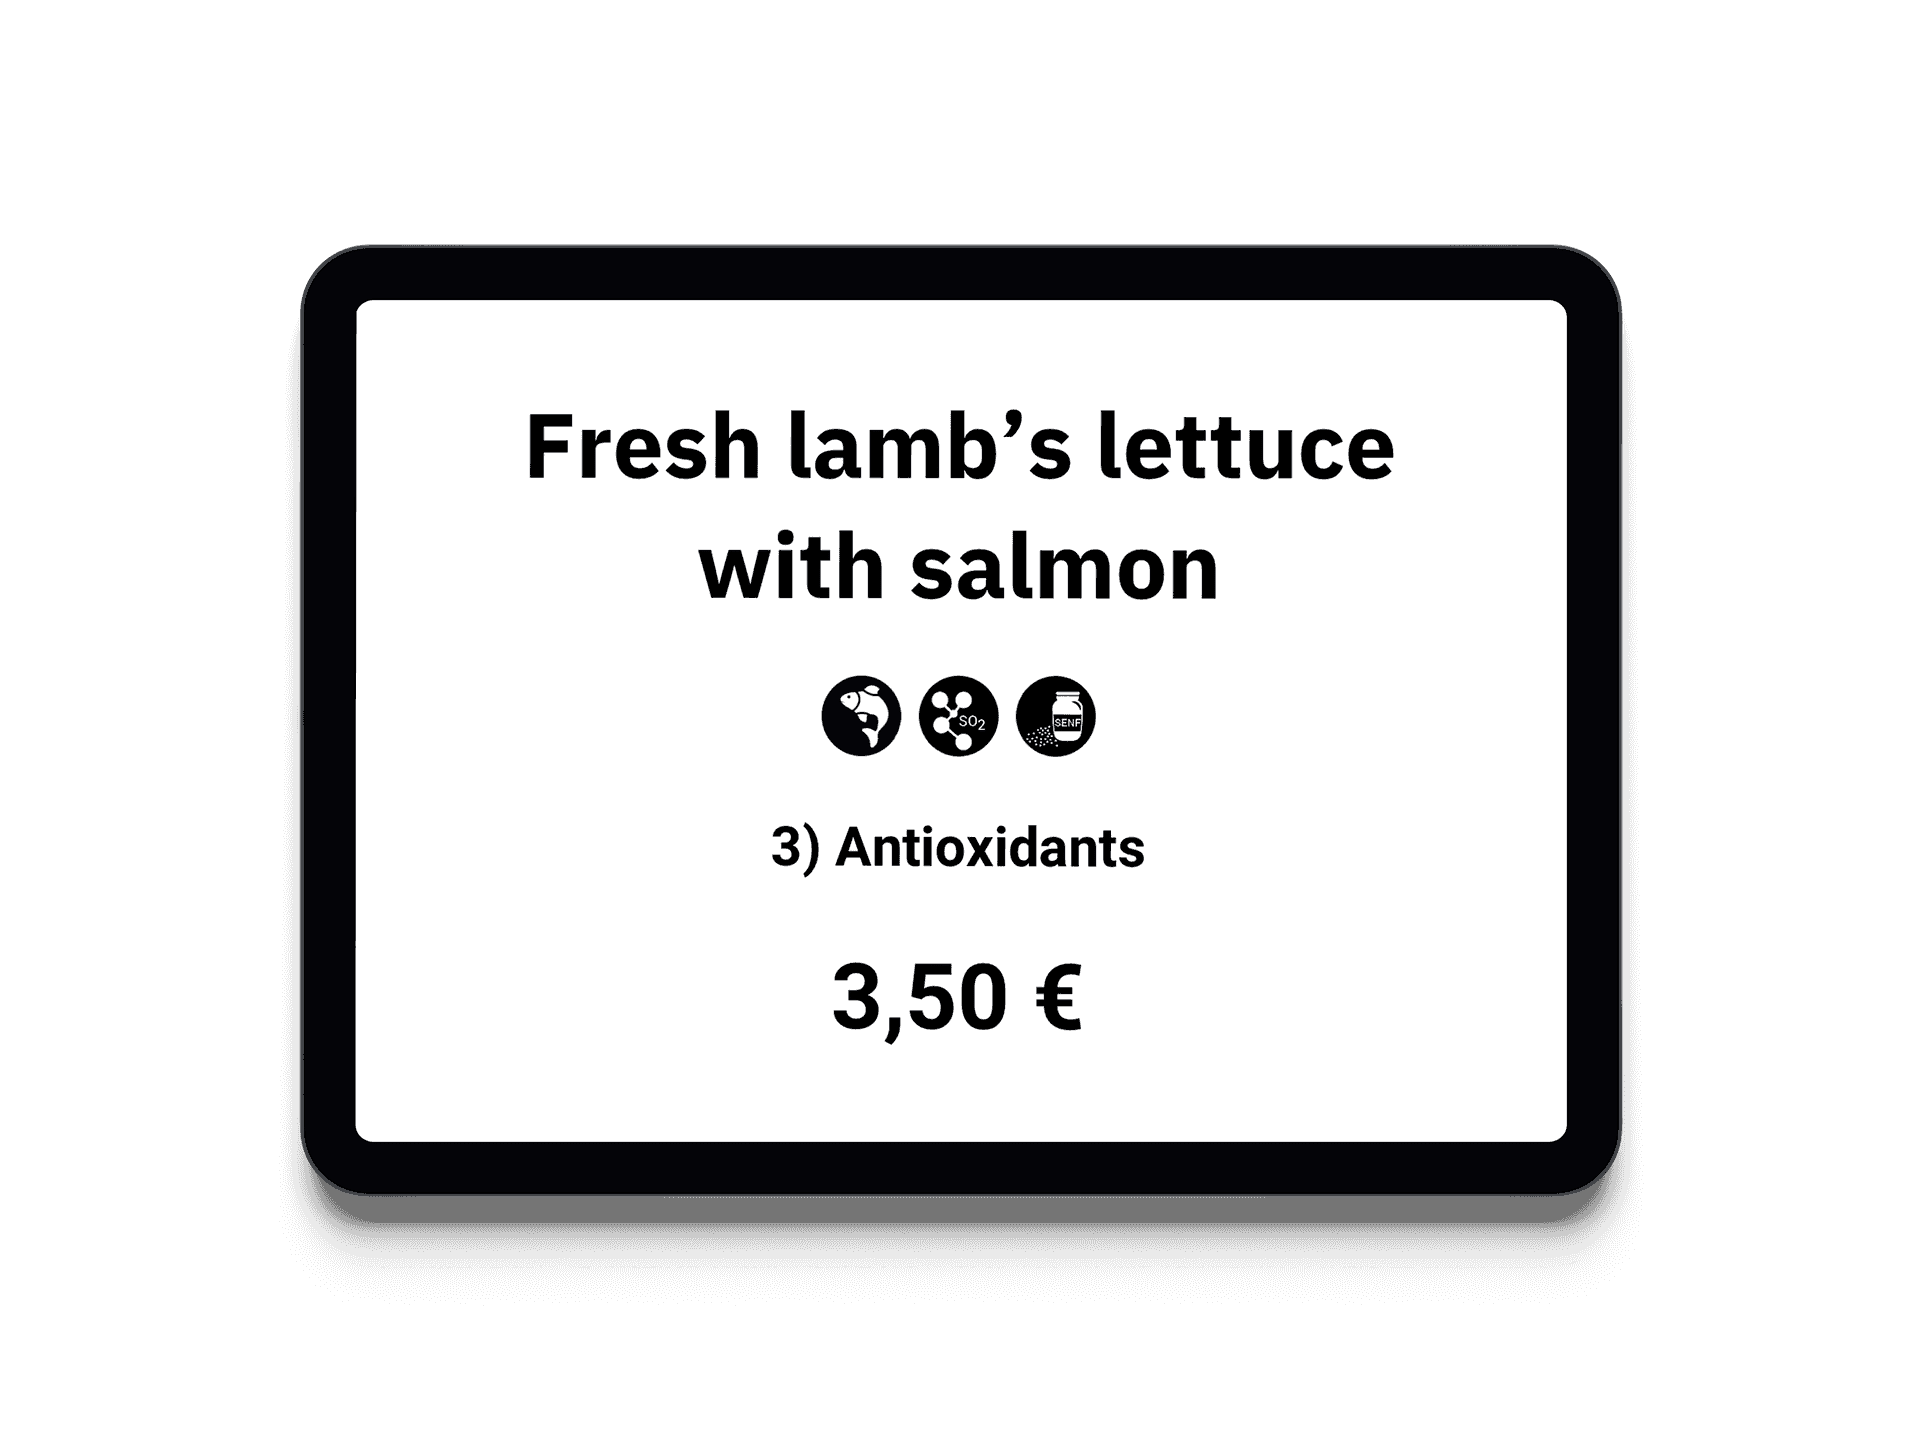 ePaper display view of the dish "Fresh lamb's lettuce with salmon", with allergen label and price of the dish